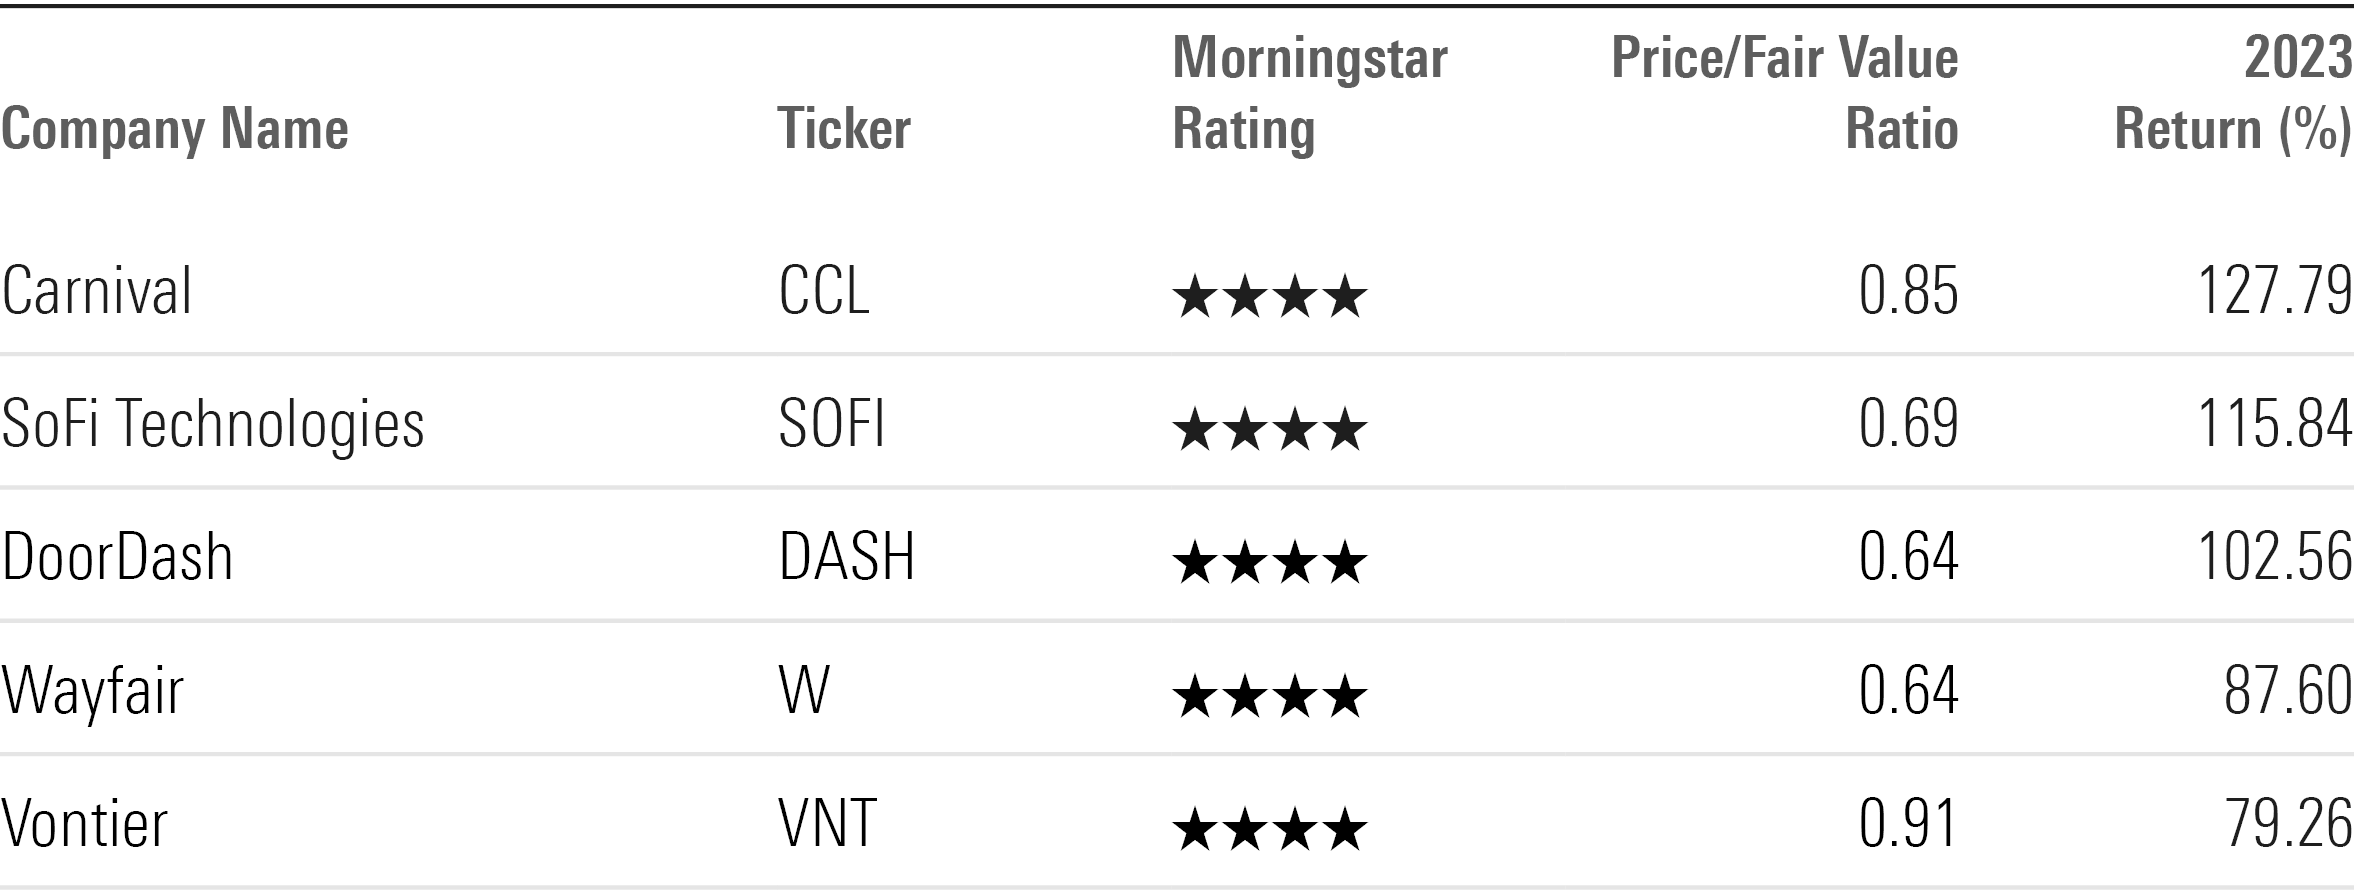 Table showing ticker, Morningstar Rating, price/fair value ratio, and return for the top-performing undervalued stocks of 2023.